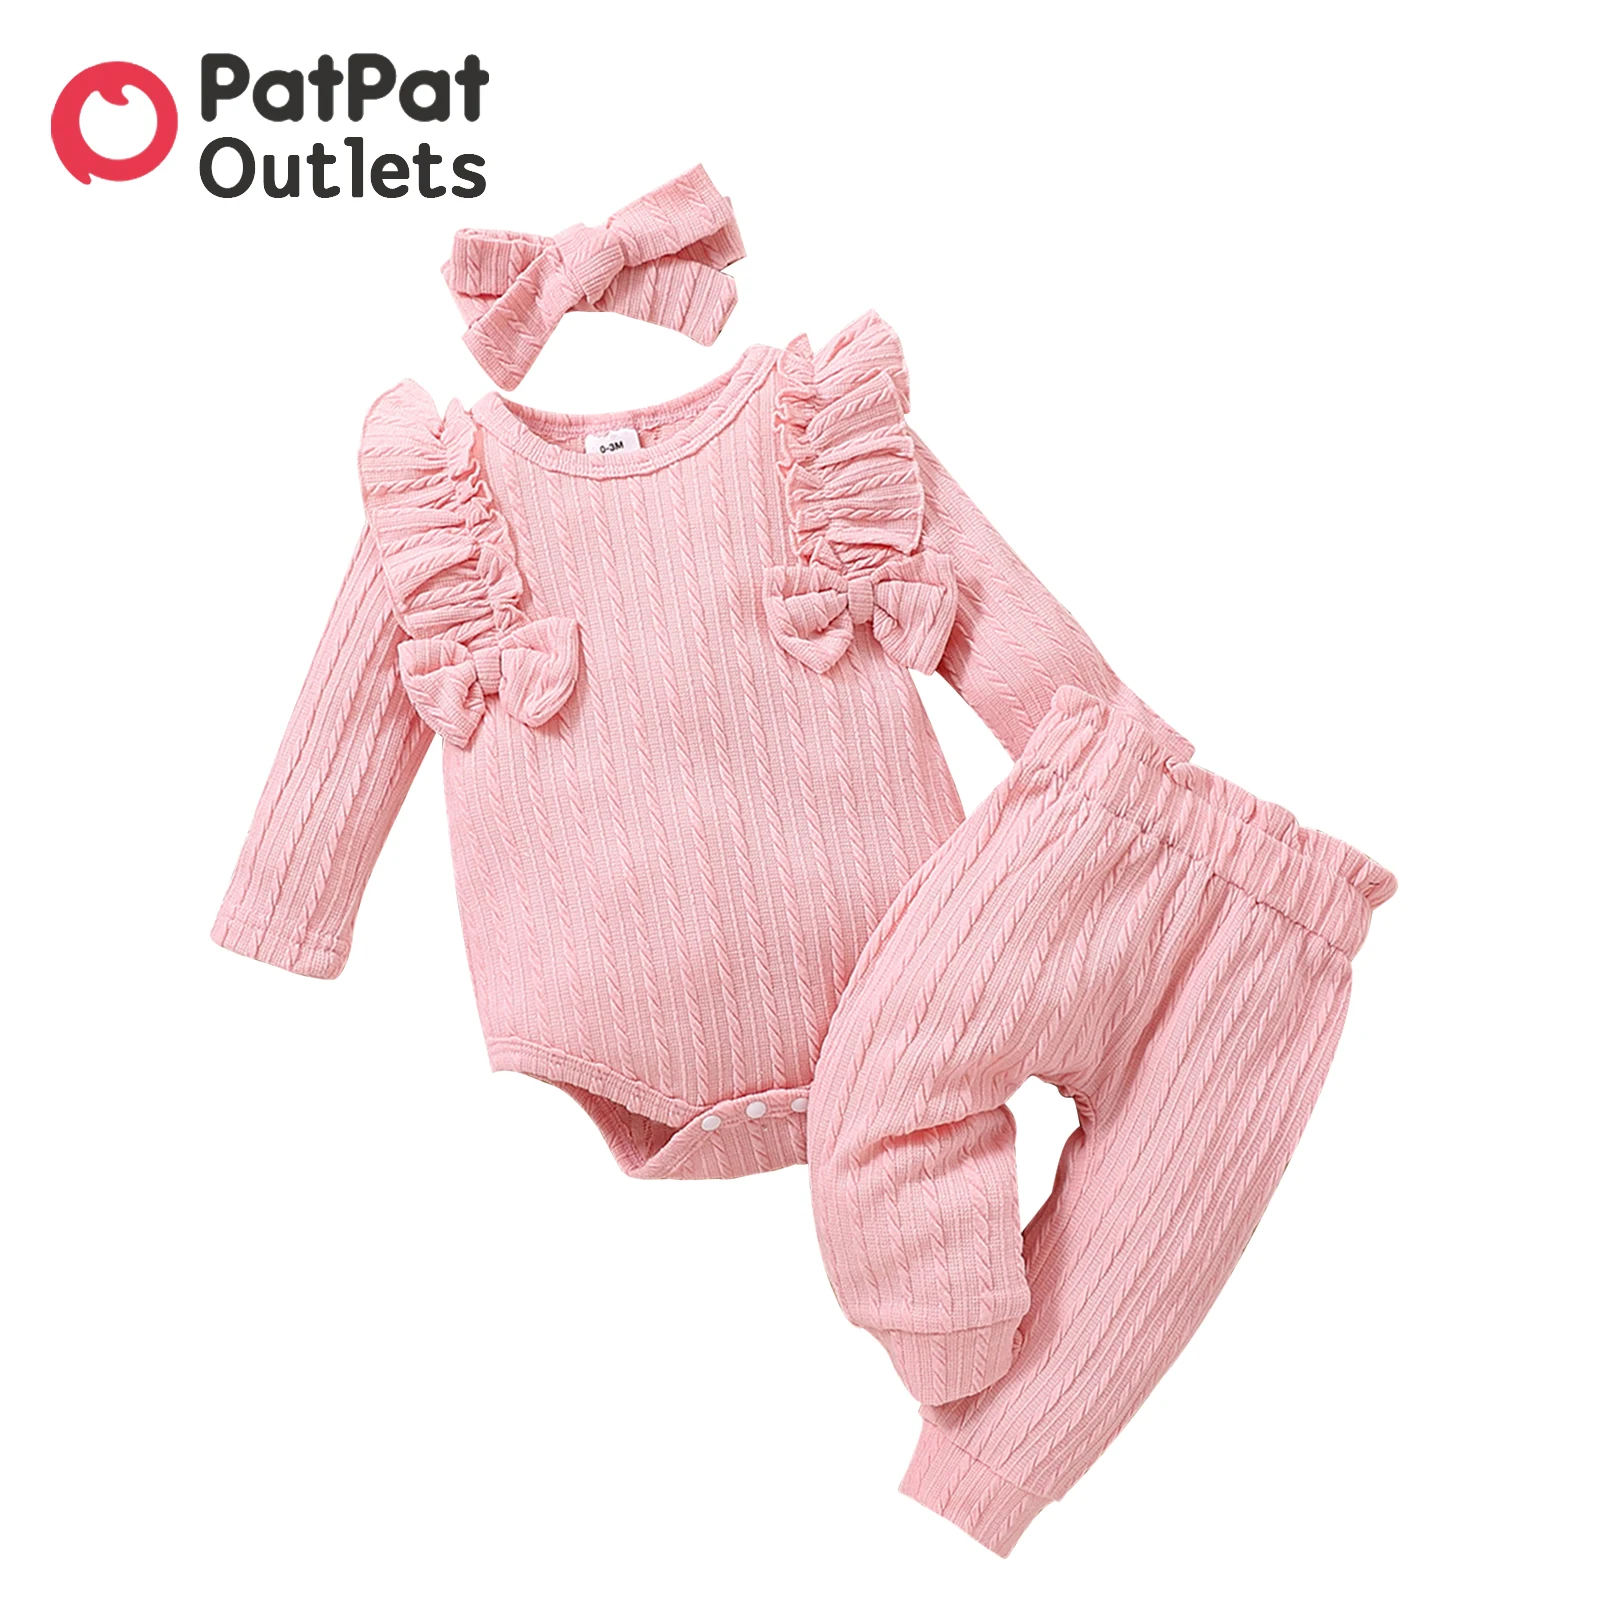 

PatPat 3pcs Newborn Baby Girl Clothes Jumpsuits New Born Babies Items Costume Pink Textured Ruffle Trim Bow Romper and Pants Set